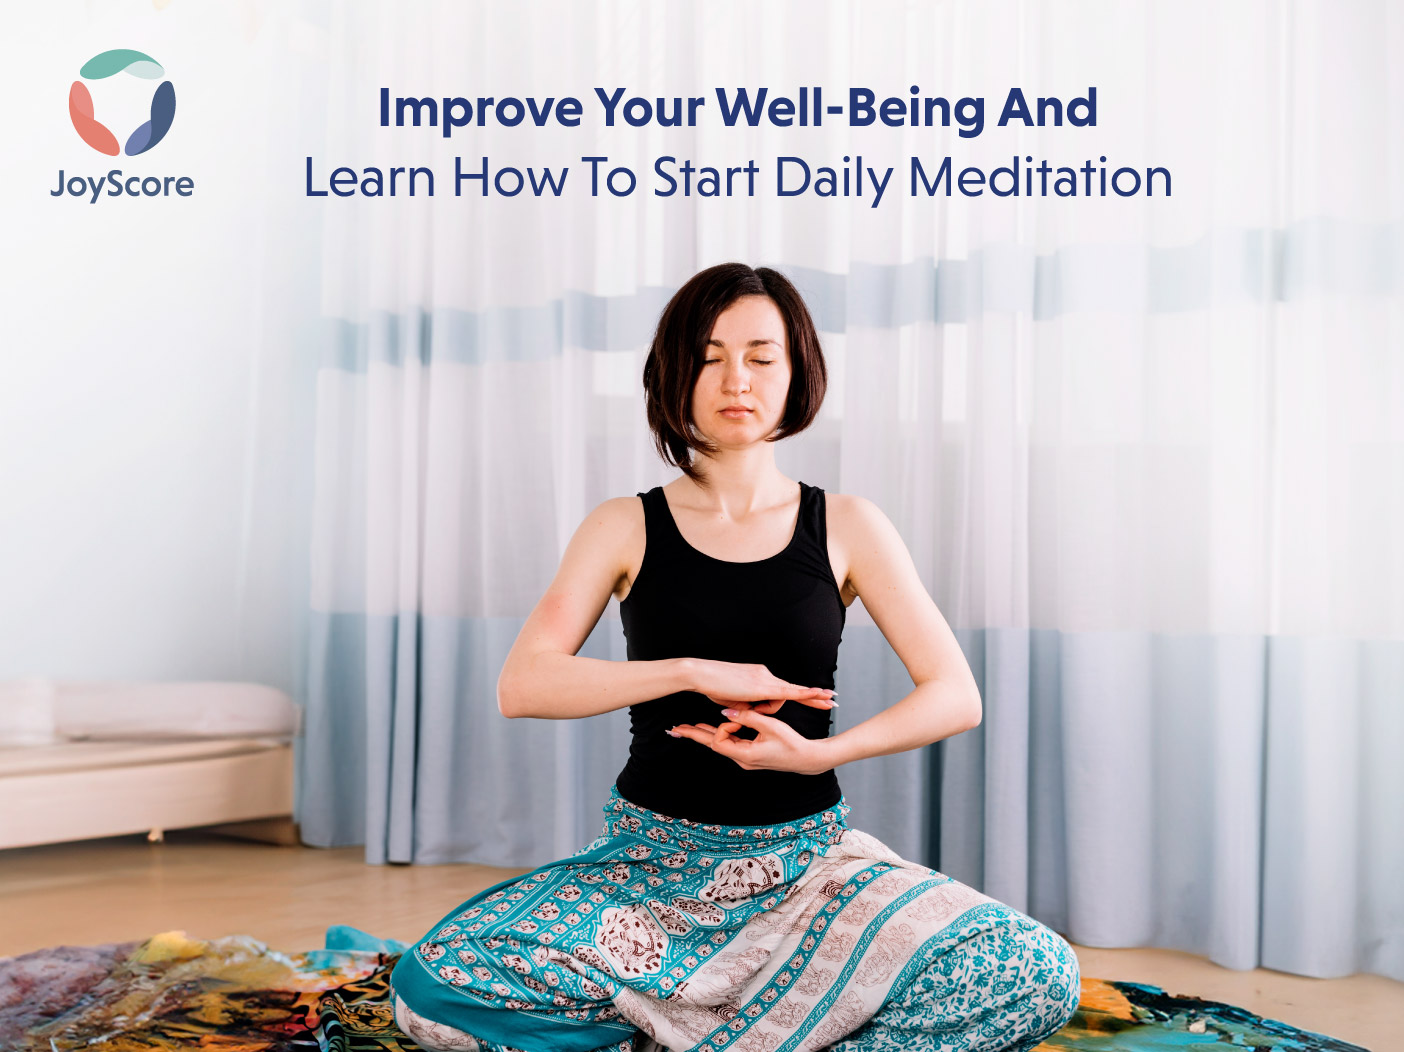 Improve Your Well-Being AndLearn How to Start Daily Meditation